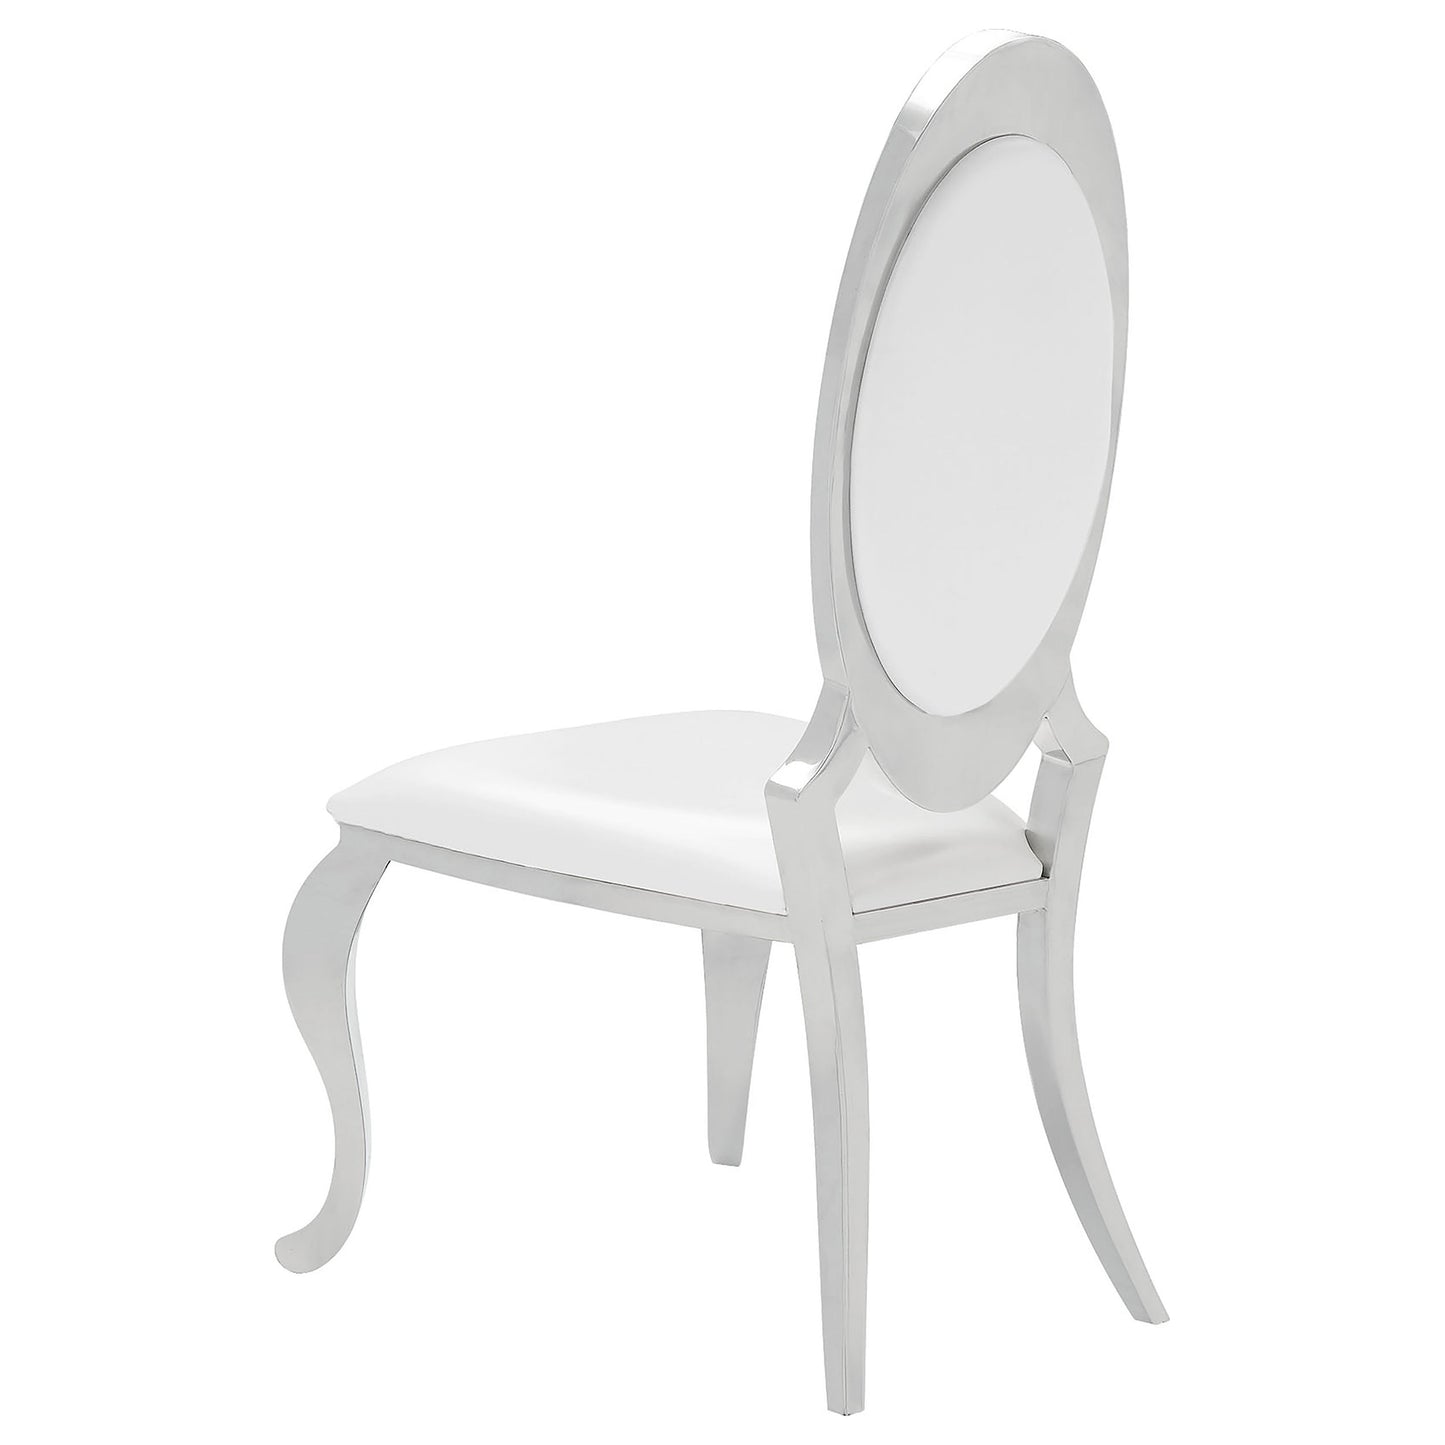 Anchorage Oval Back Side Chairs Cream and Chrome (Set of 2)